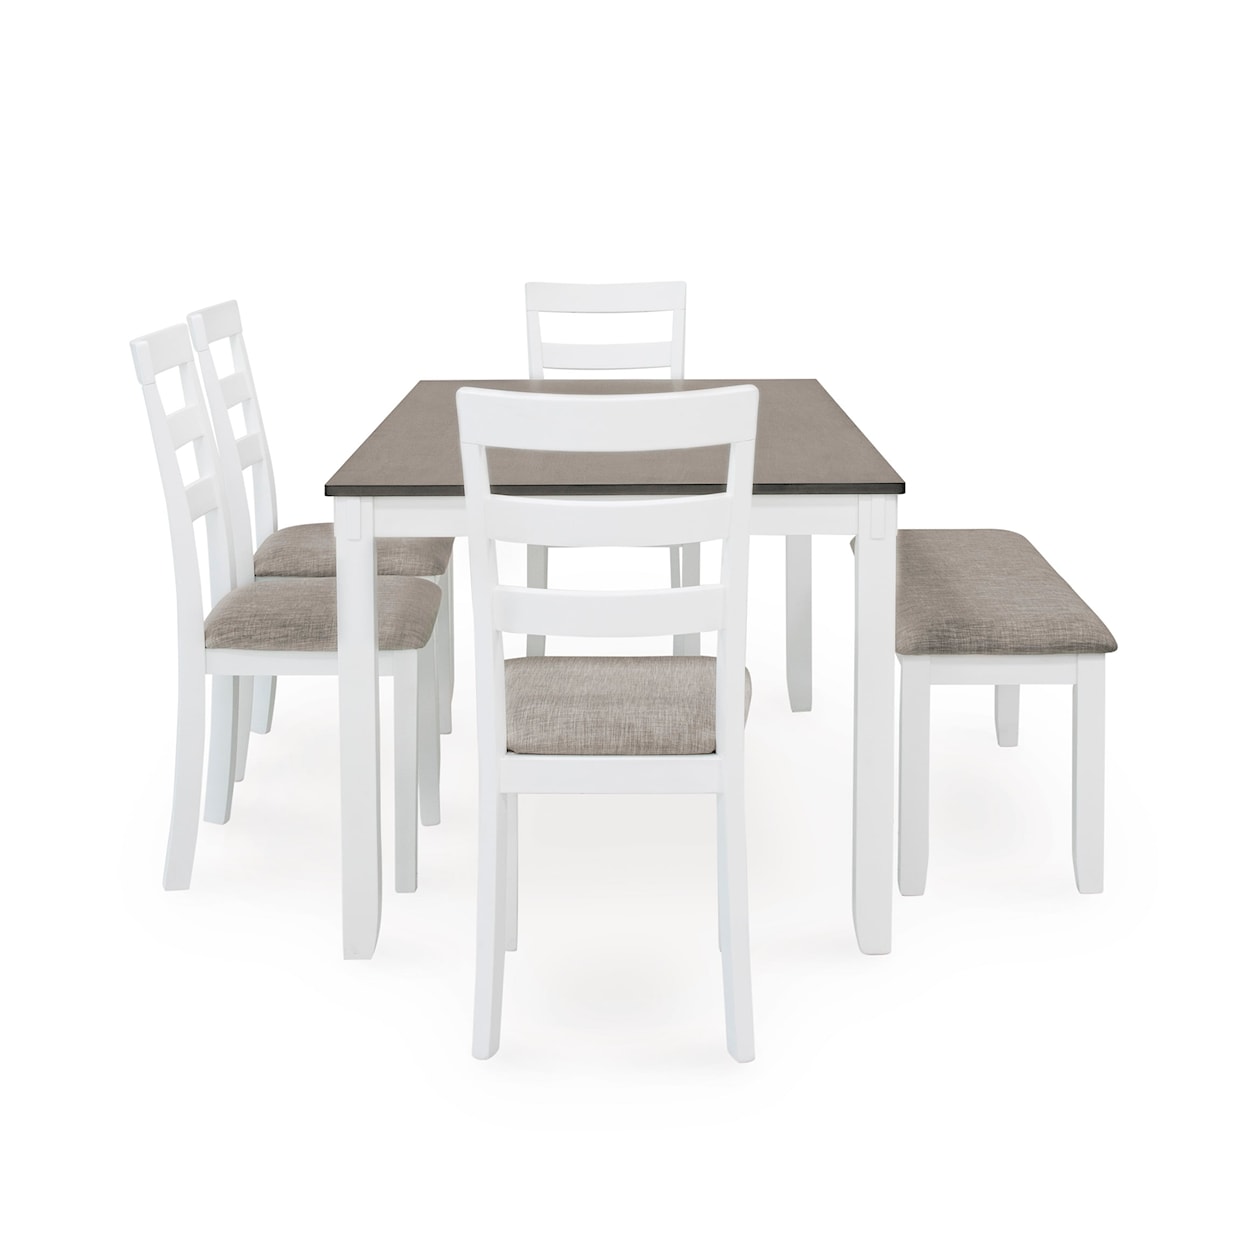 Benchcraft Stonehollow Dining Table and Chairs with Bench Set